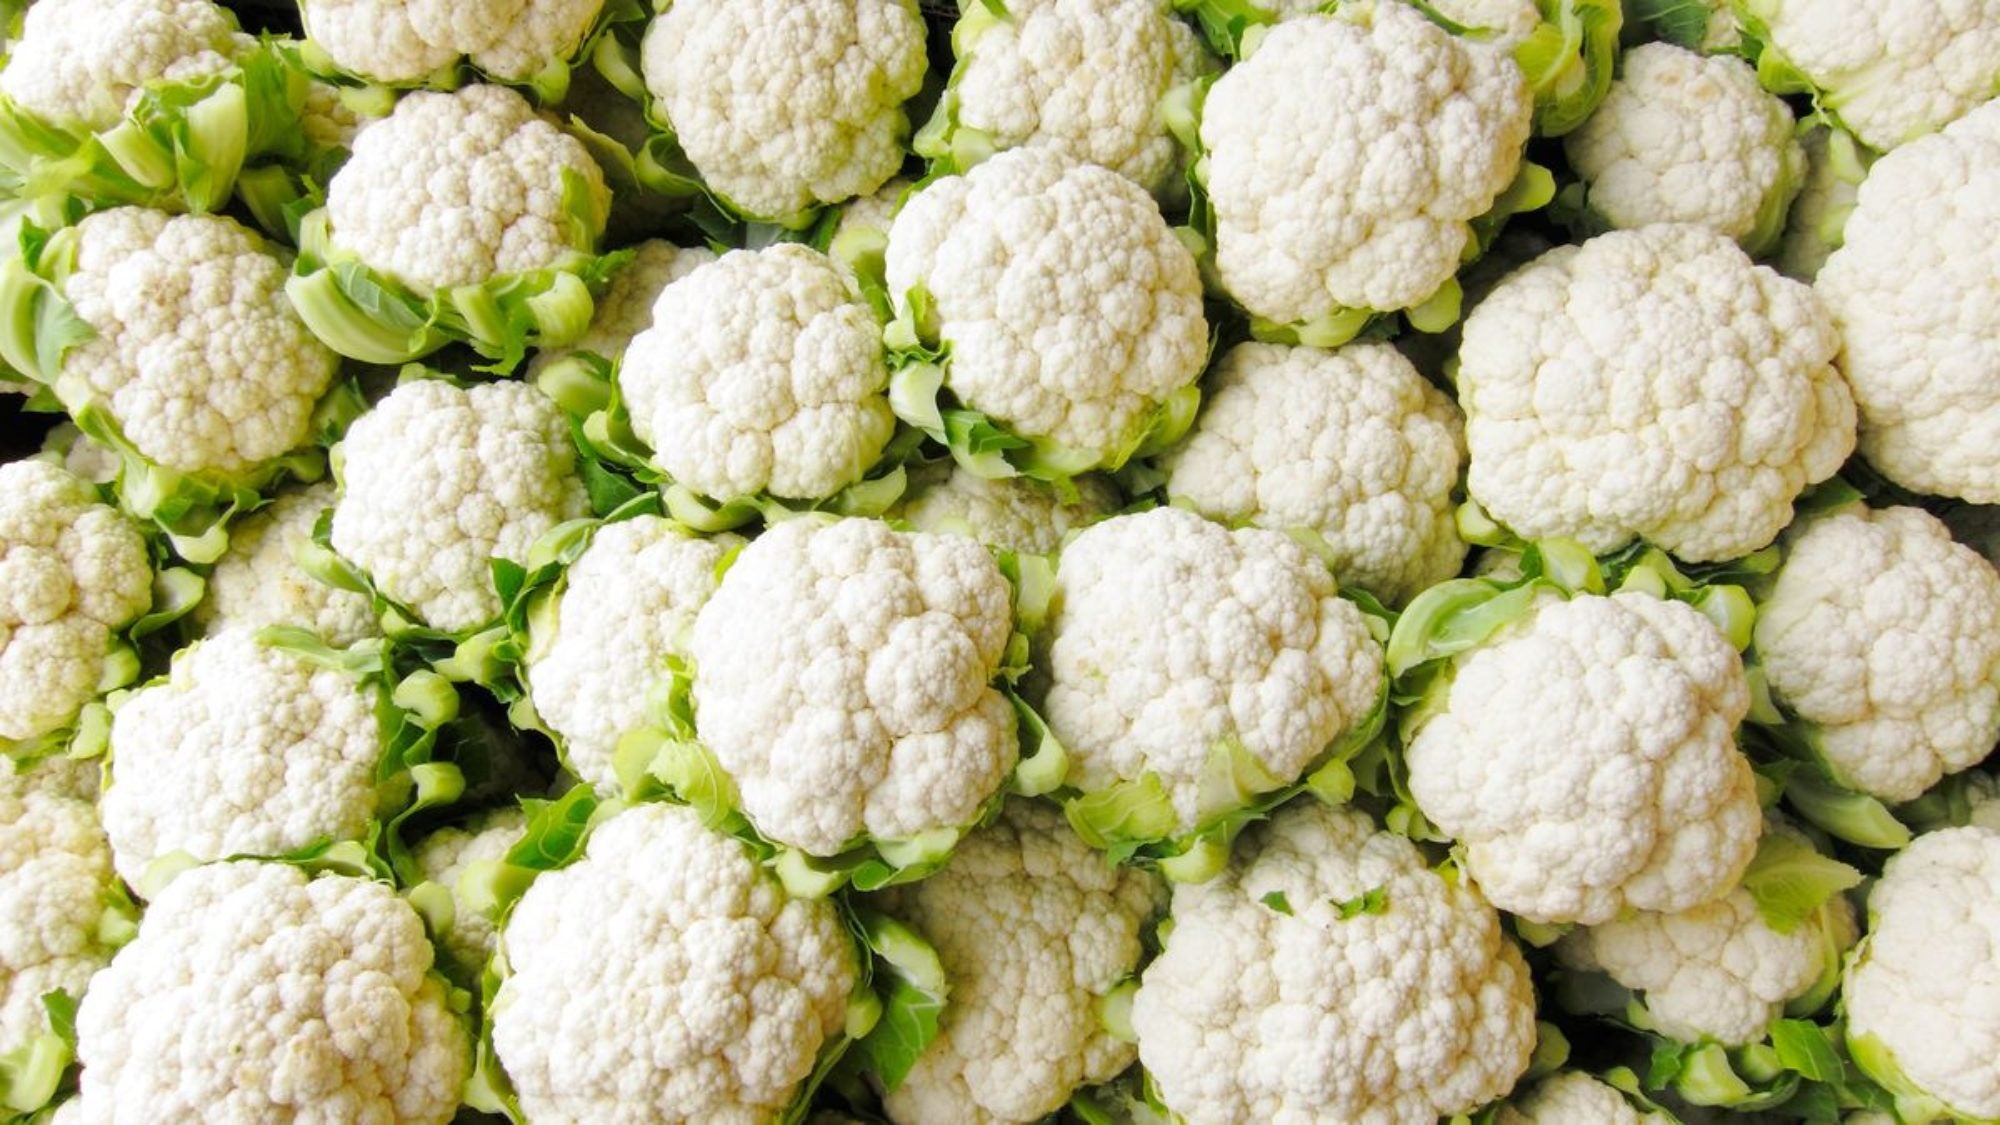 Cauliflower: Why Keto Dieters Love This Low-Carb Vegetable